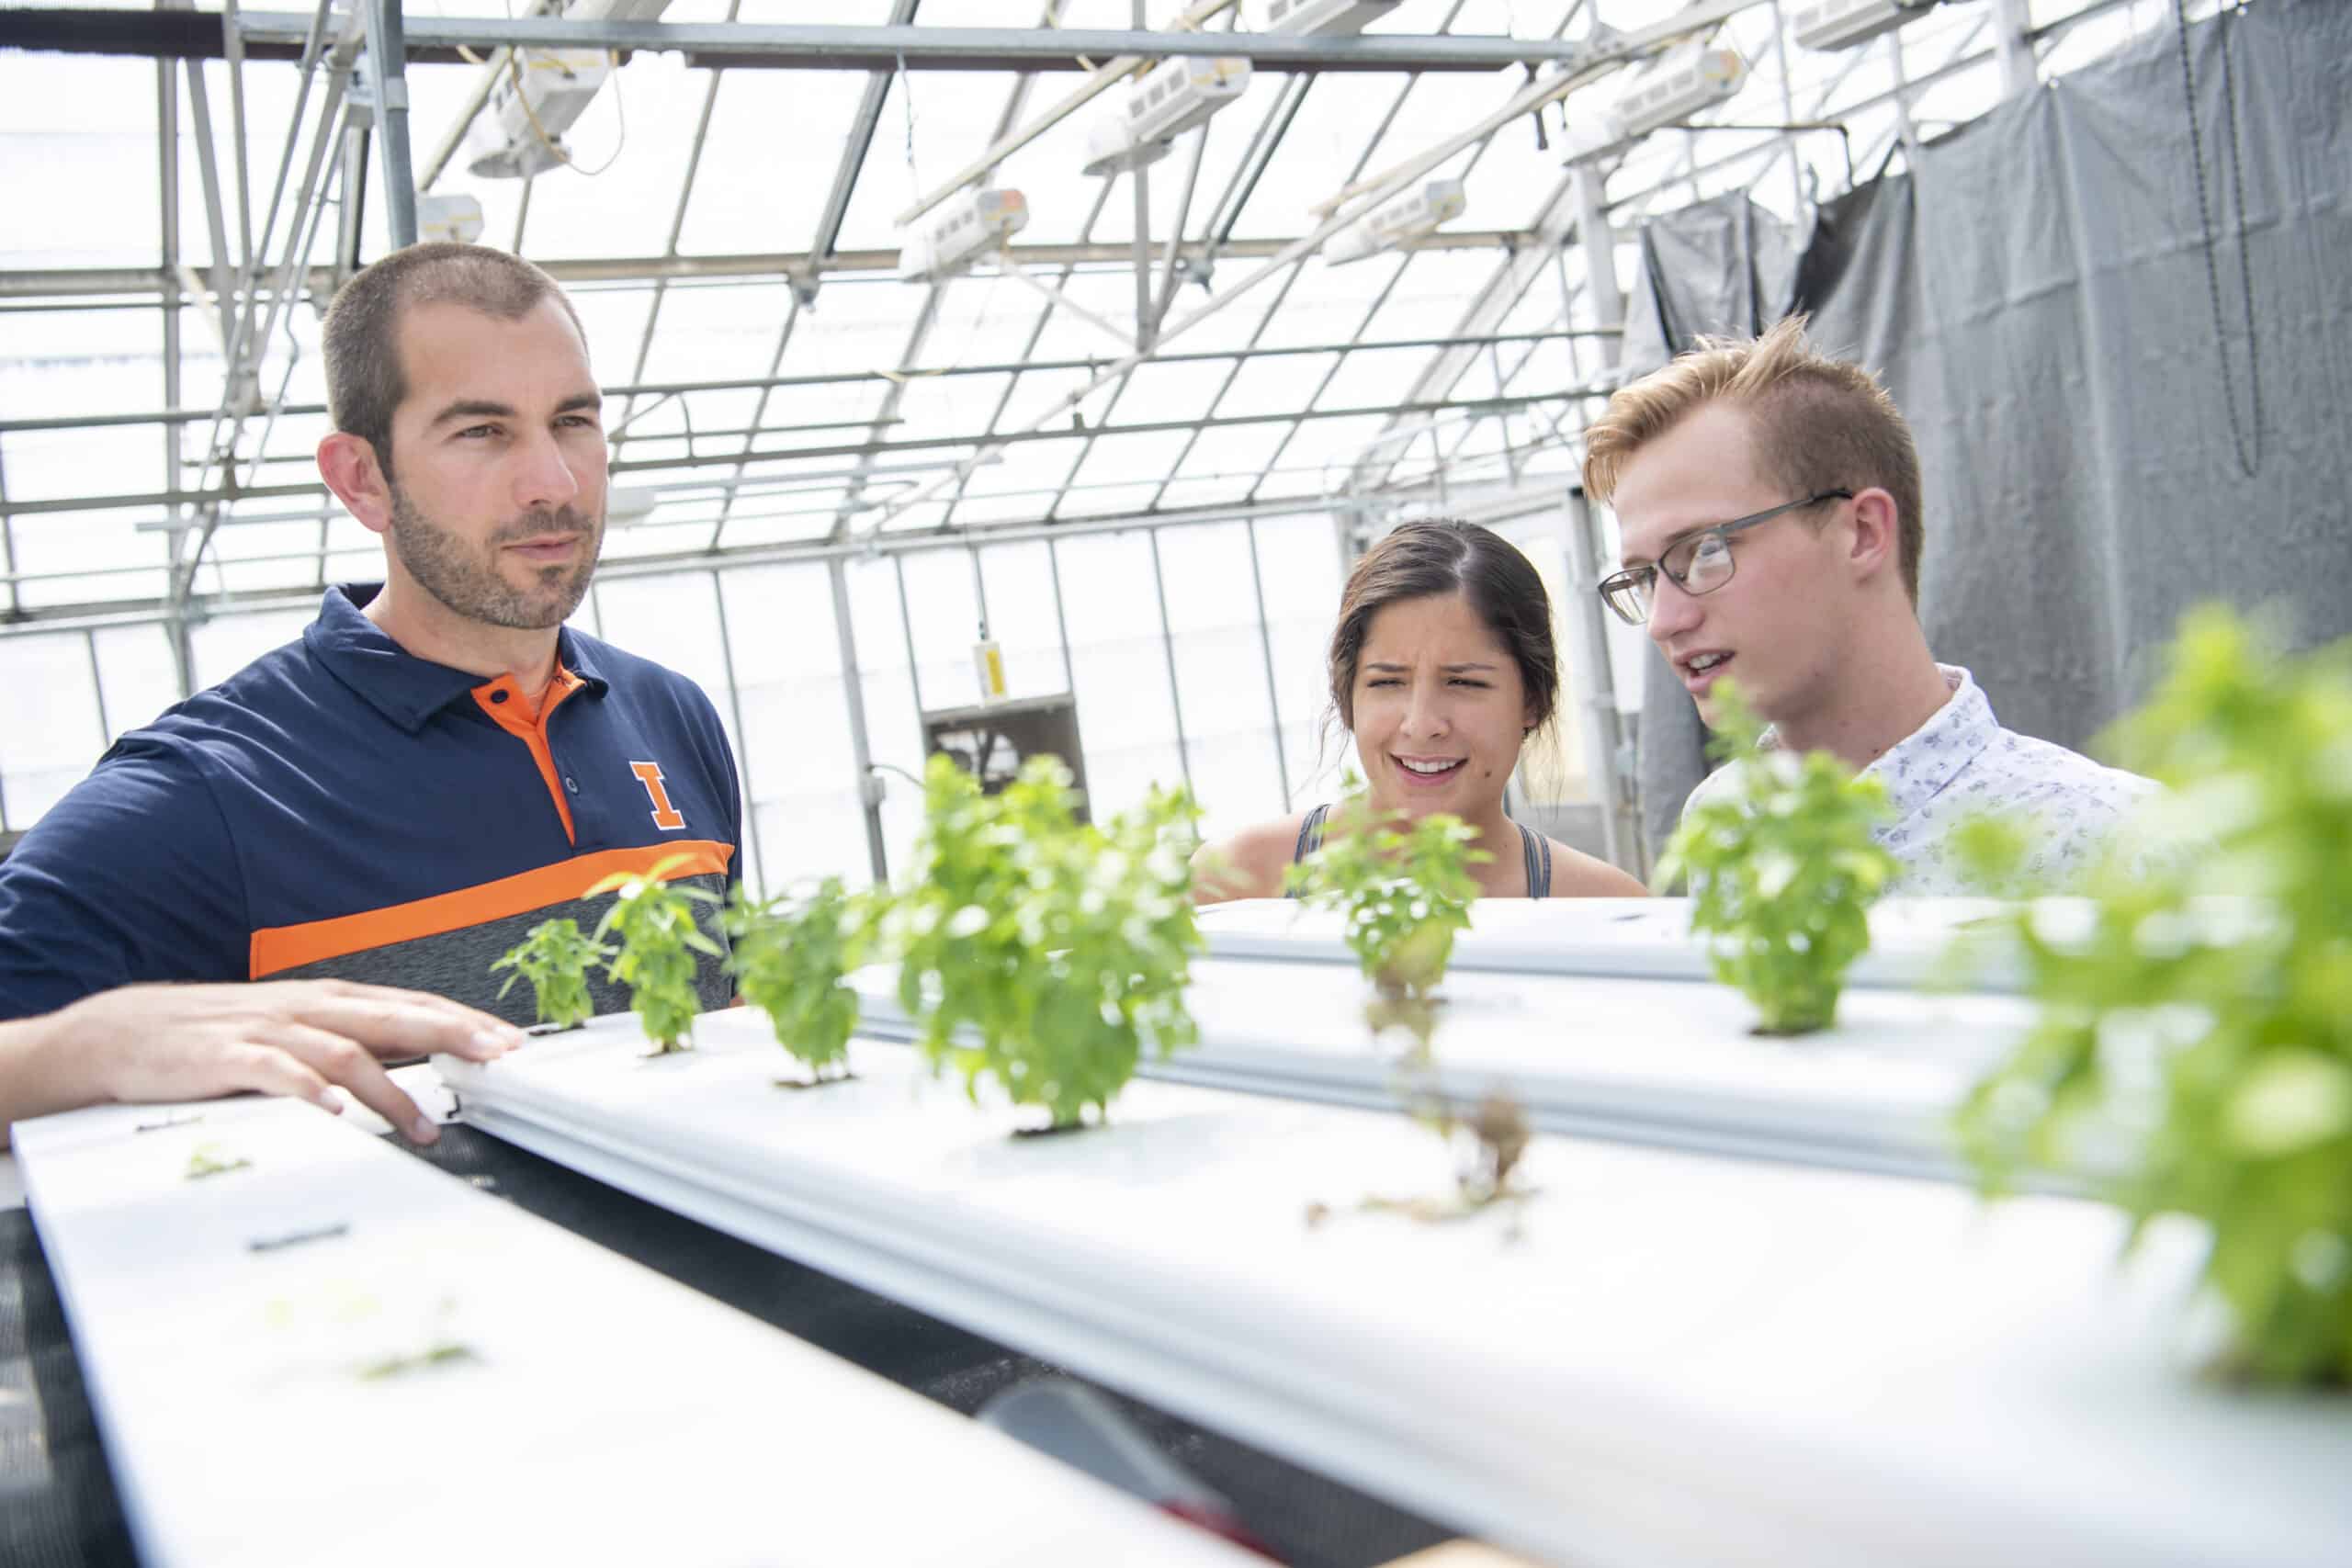 University of Illinois Urbana-Champaign: Nurturing tomorrow’s agricultural and biological engineers